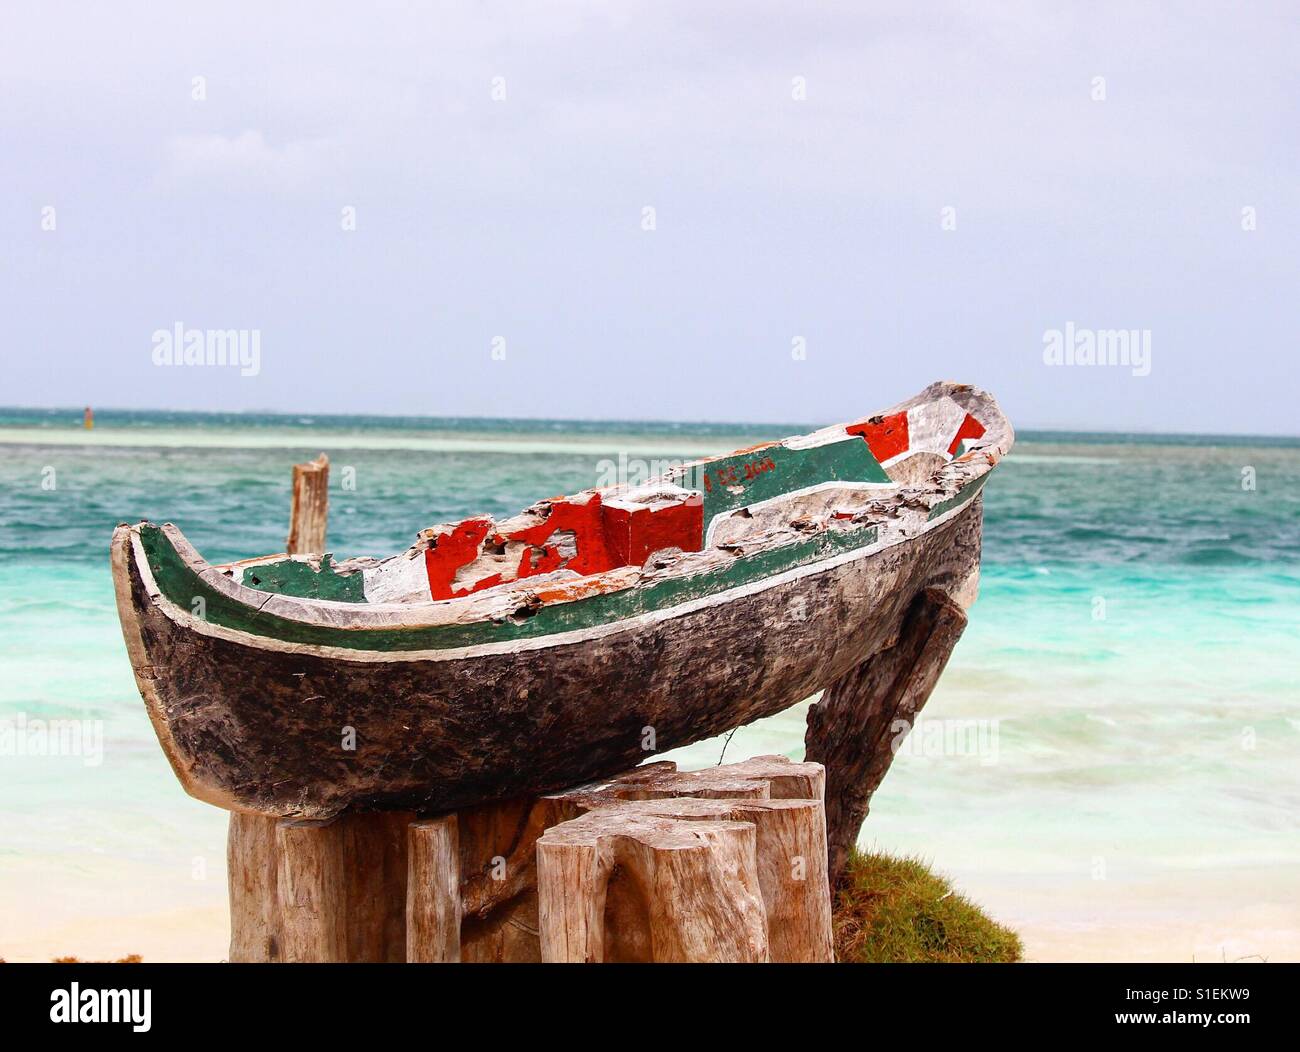 Rustic cayuco (dig out canoe) overlooking the Caribbean ocean. Stock Photo